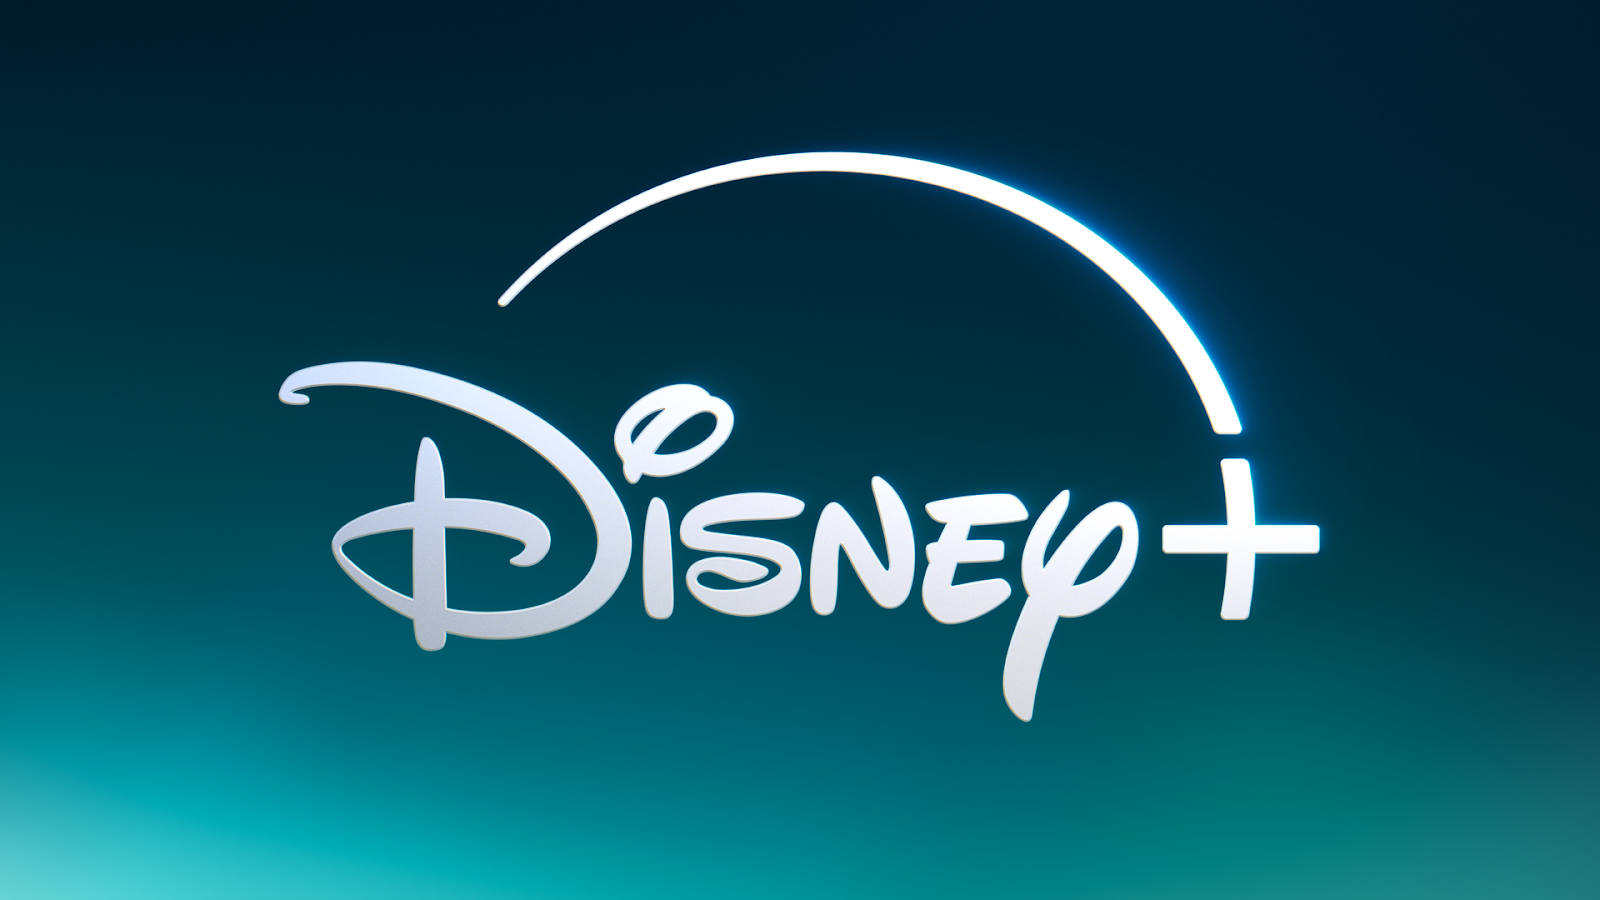 Disney+ Will Reportedly Add Live 24/7 Channels of Popular Shows & Programming